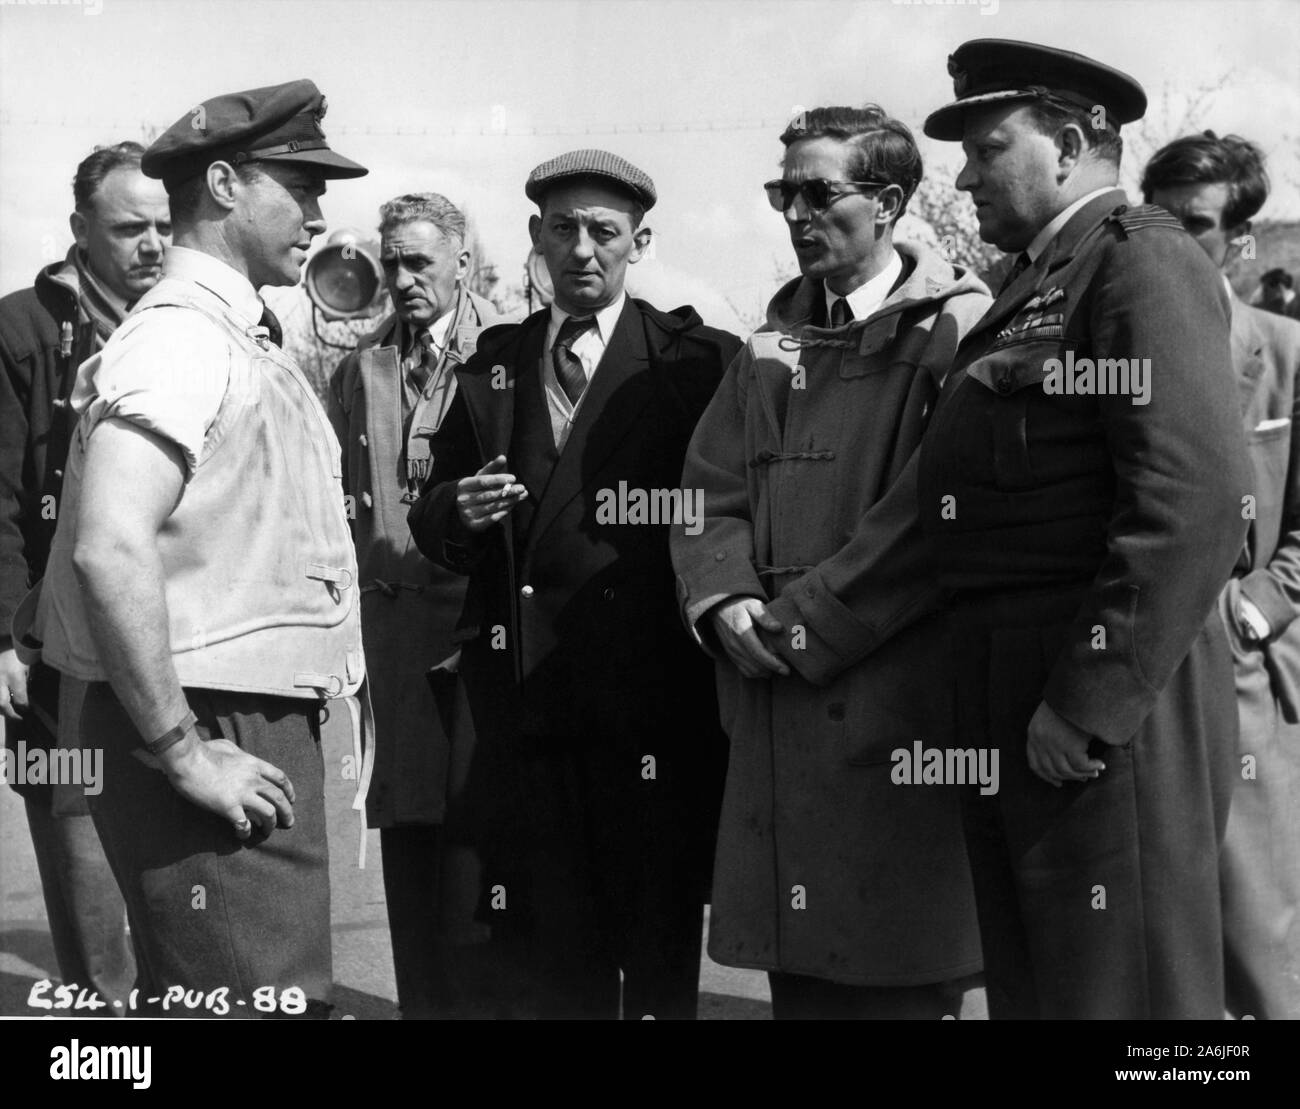 RICHARD TODD as Wing Commander Guy Gibson with Director MICHAEL ANDERSON (in sunglasses) and Technical Advisor Group Captain / Air Commodore J.N.H. WHITWORTH on set location candid filming THE DAM BUSTERS 1955 books Paul Brickhill and Guy Gibson screenplay R.C. Sherriff Associated British Picture Corporation Stock Photo